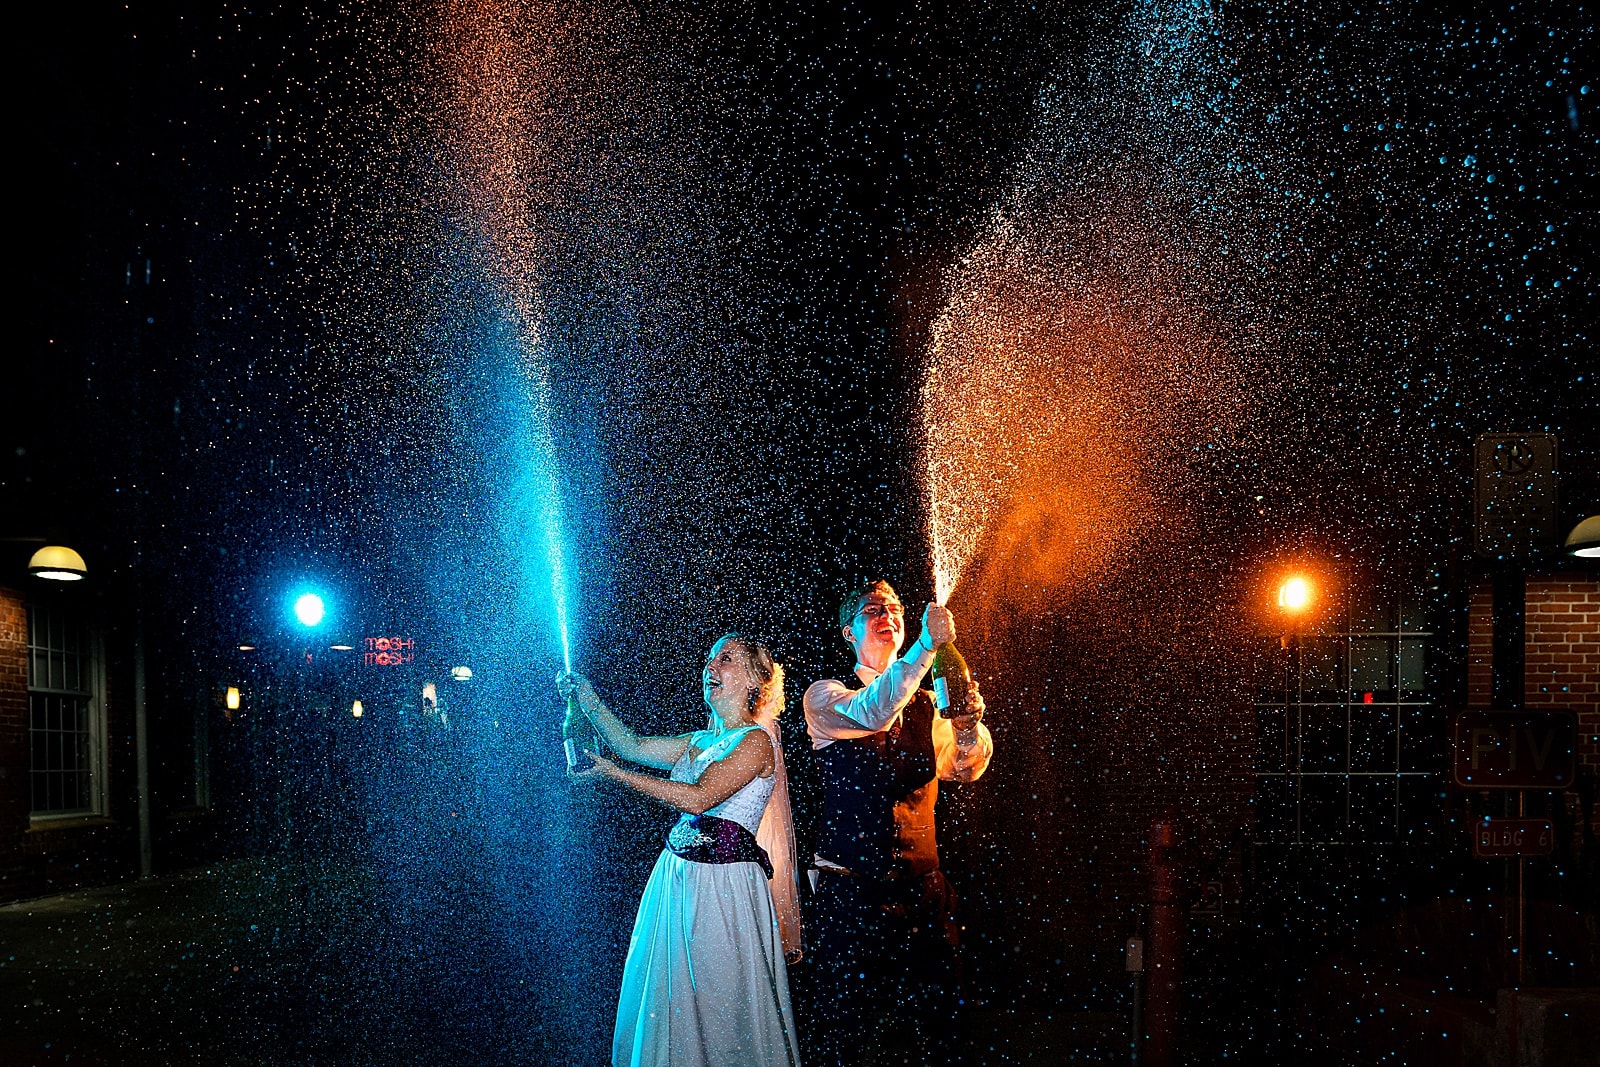 This couple had a champagne spray exit and it was AMAZING. Most fun wedding idea!!